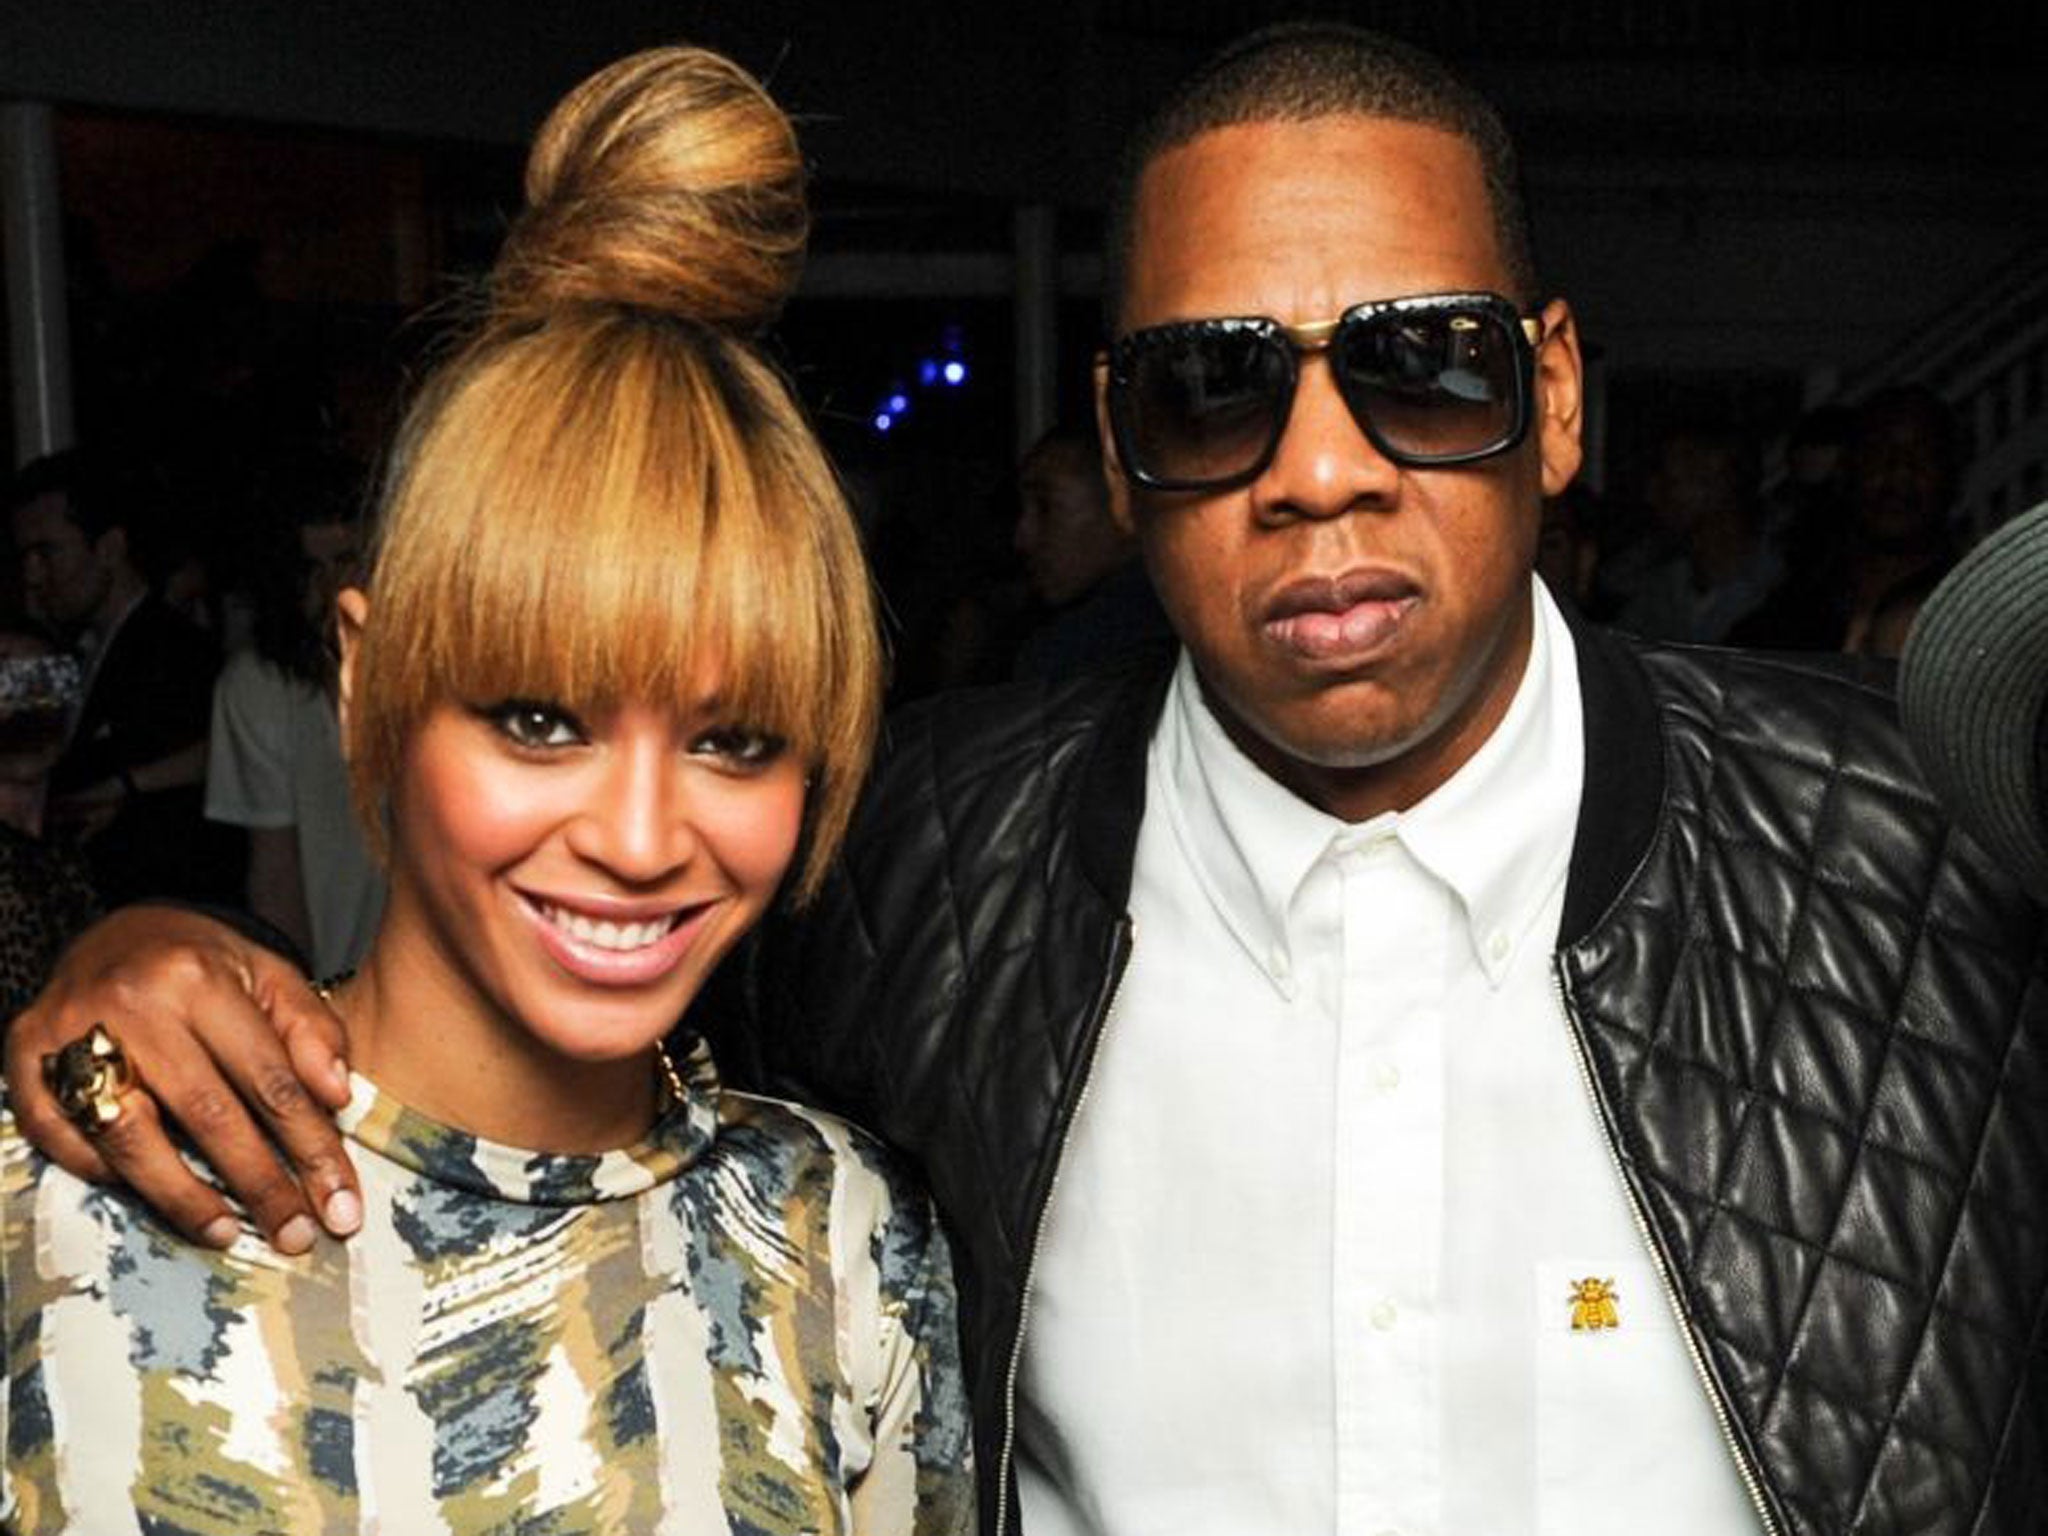 Kale eating: Beyonce and her husband Jay-Z are both known to eat kale